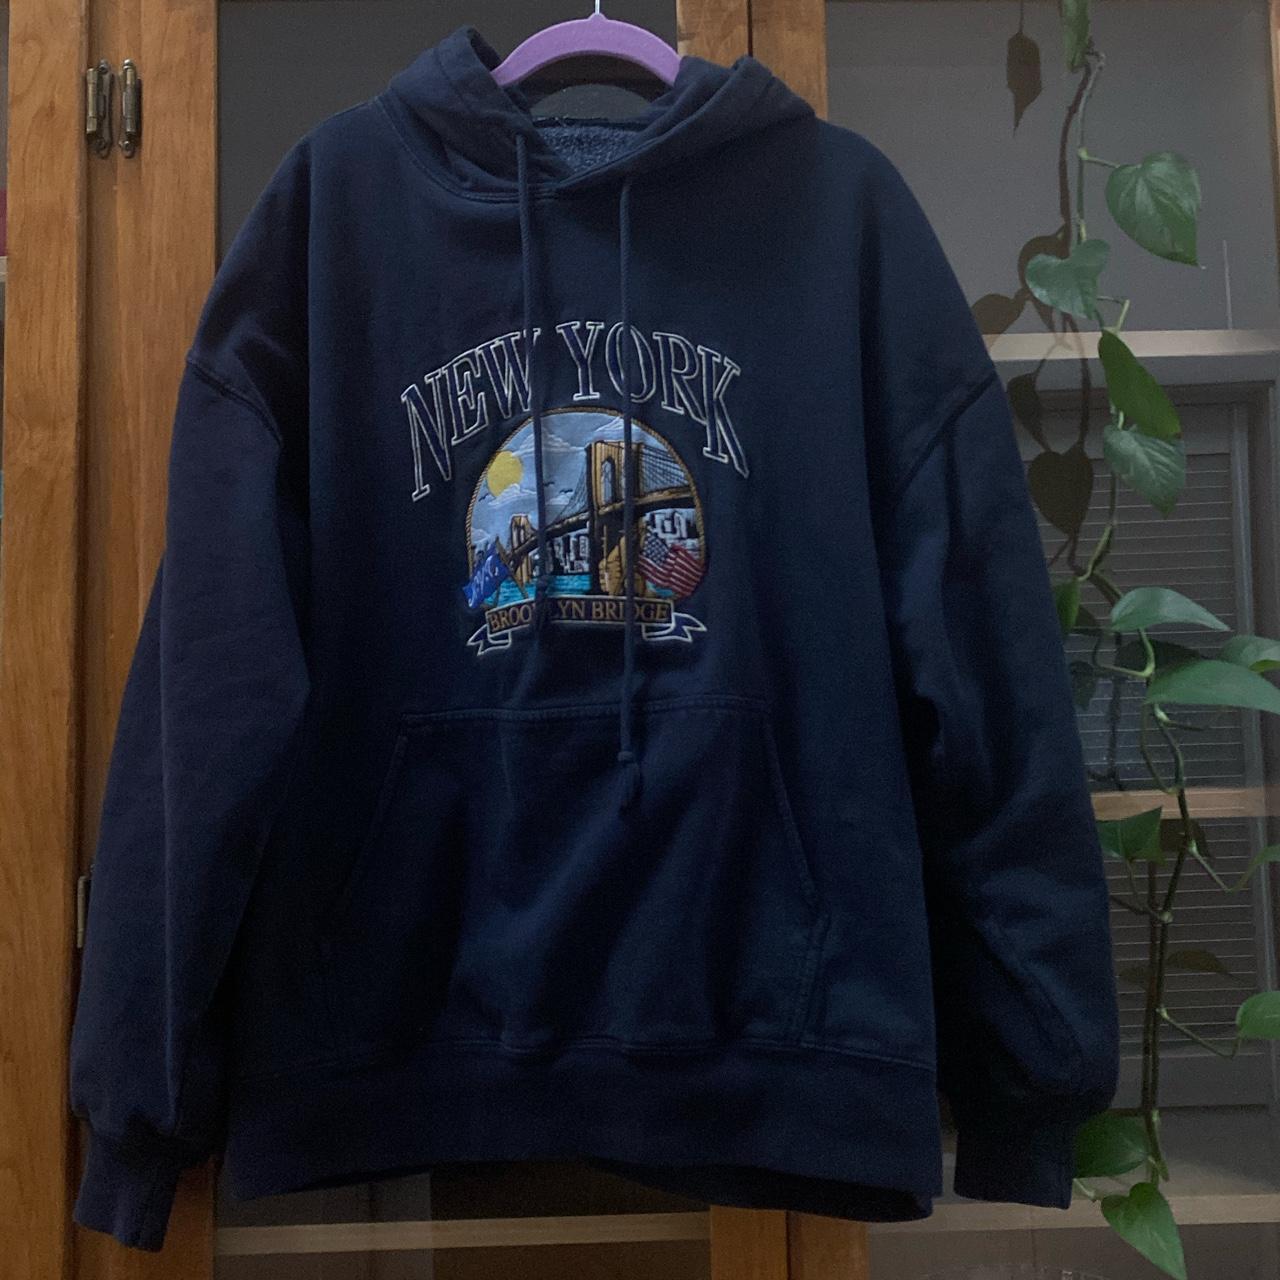 New York Embroidered Hoodie